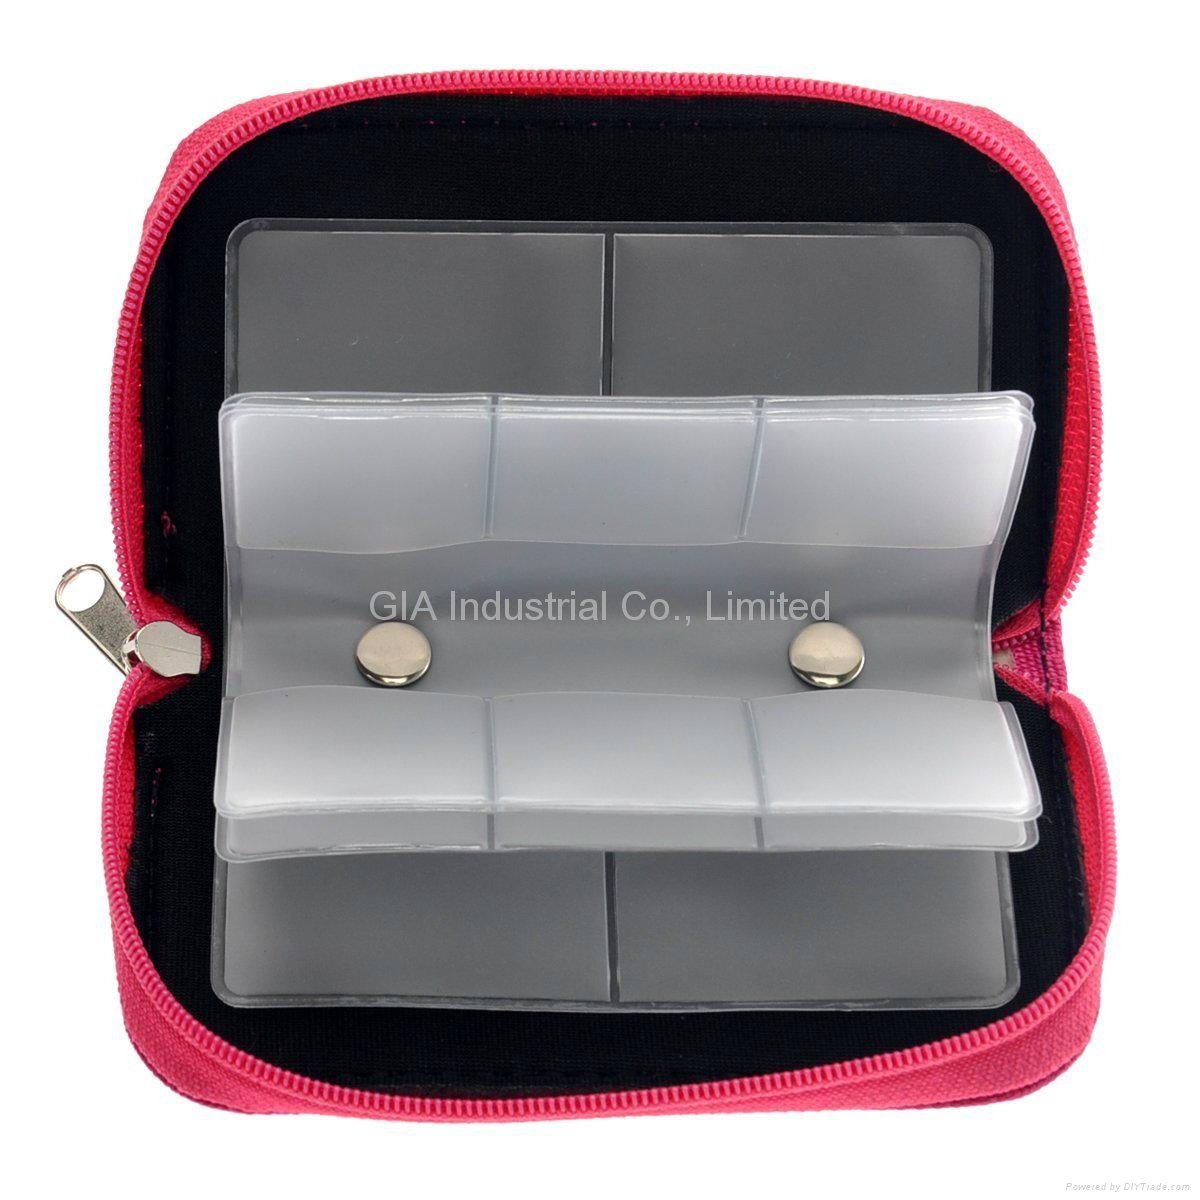 SD Card Memory Card Storage Carrying Case Holder Wallet 5